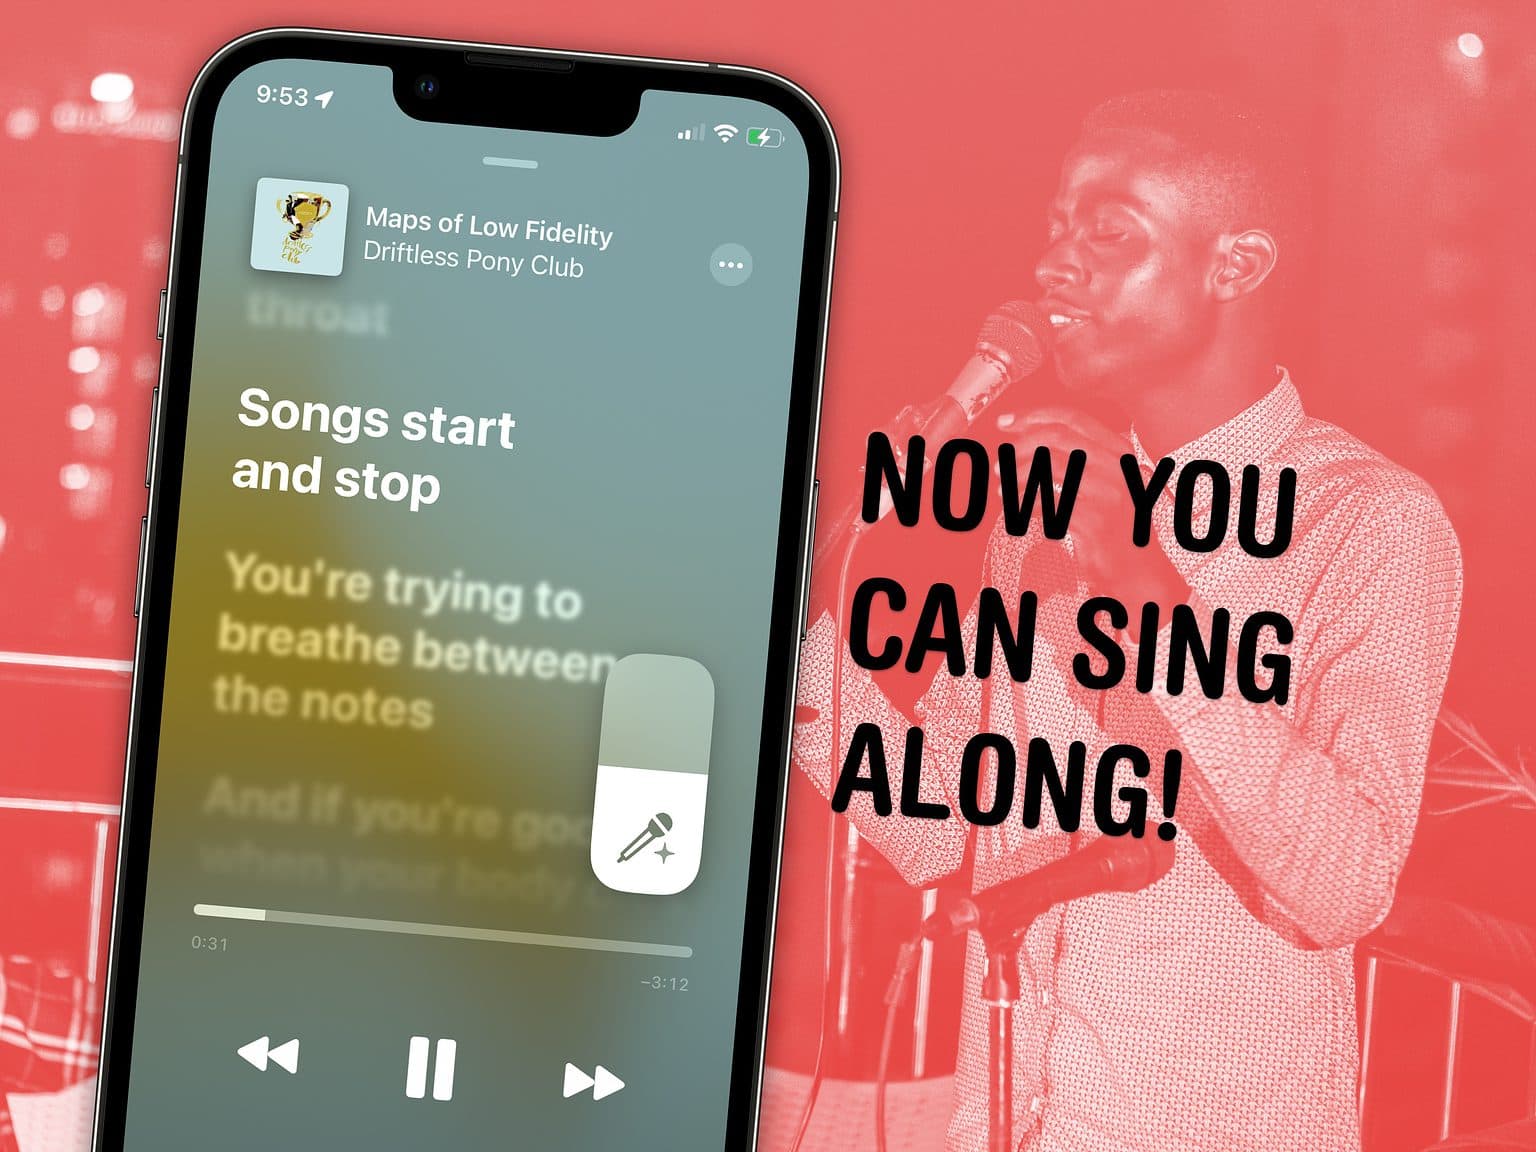 Now you can sing along!